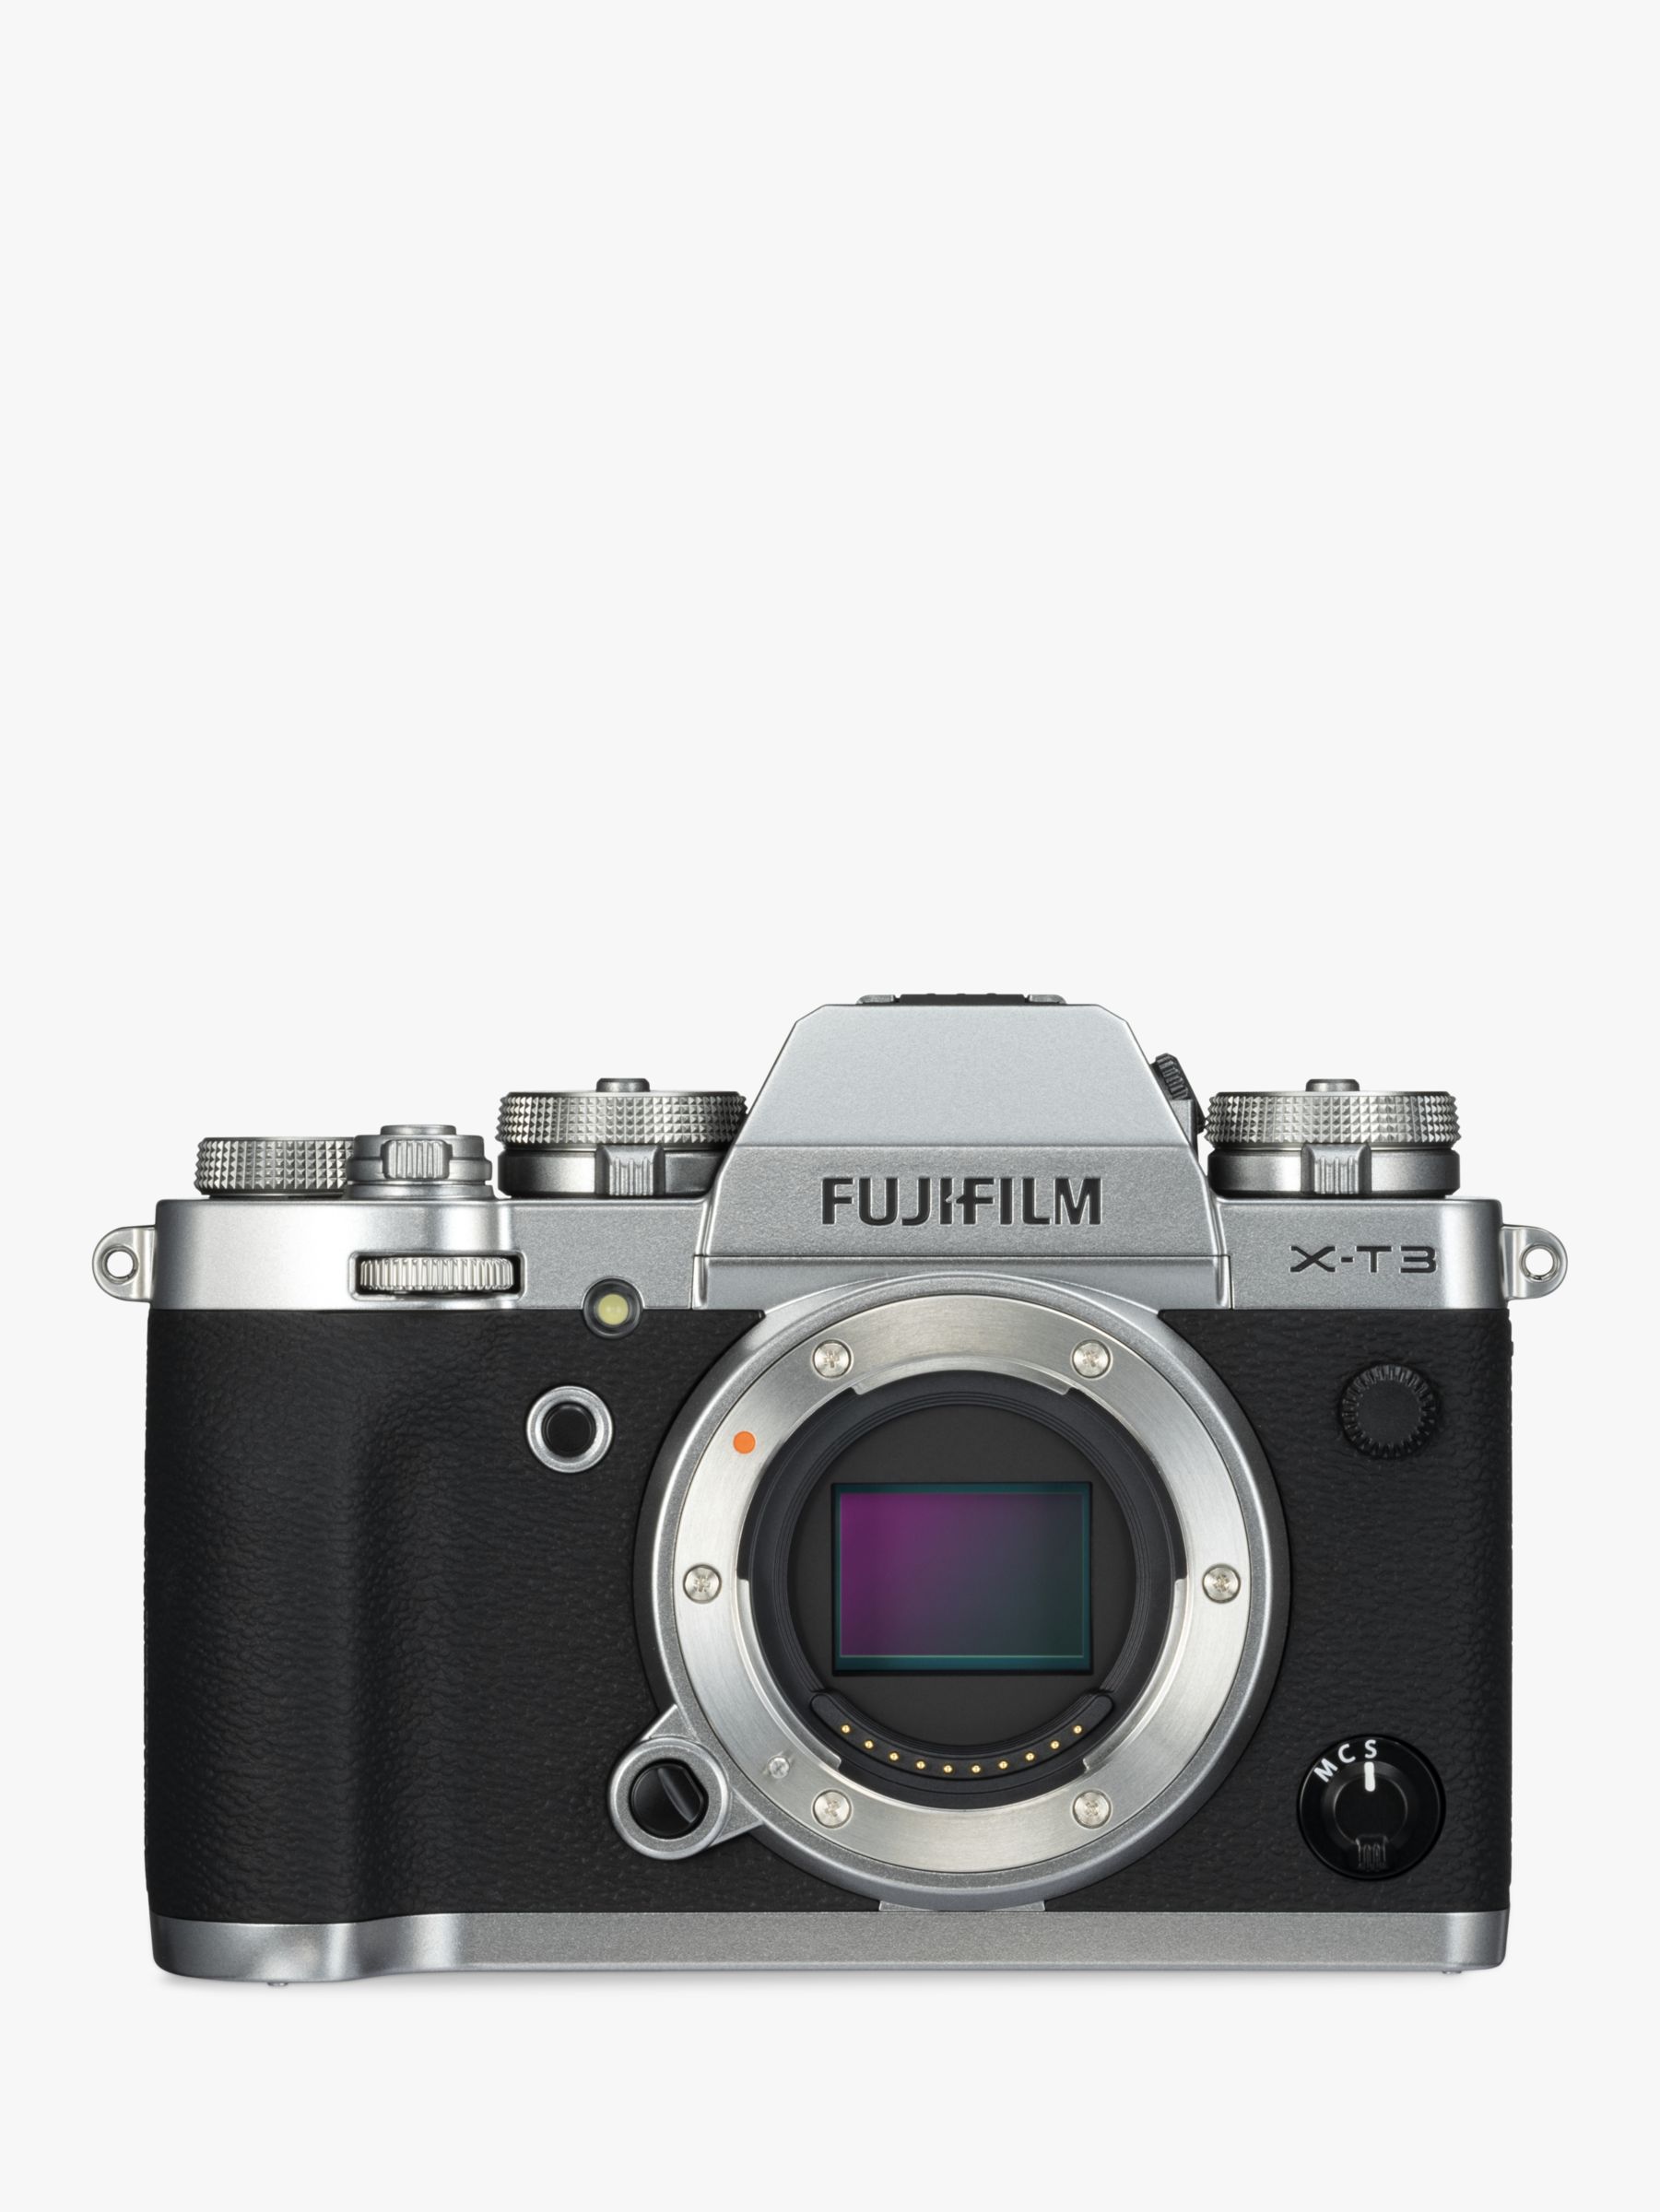 Image of Fujifilm XT3 Compact System Camera 4K Ultra HD 261MP WiFi OLED EVF 3 LCD Touch Screen Body Only